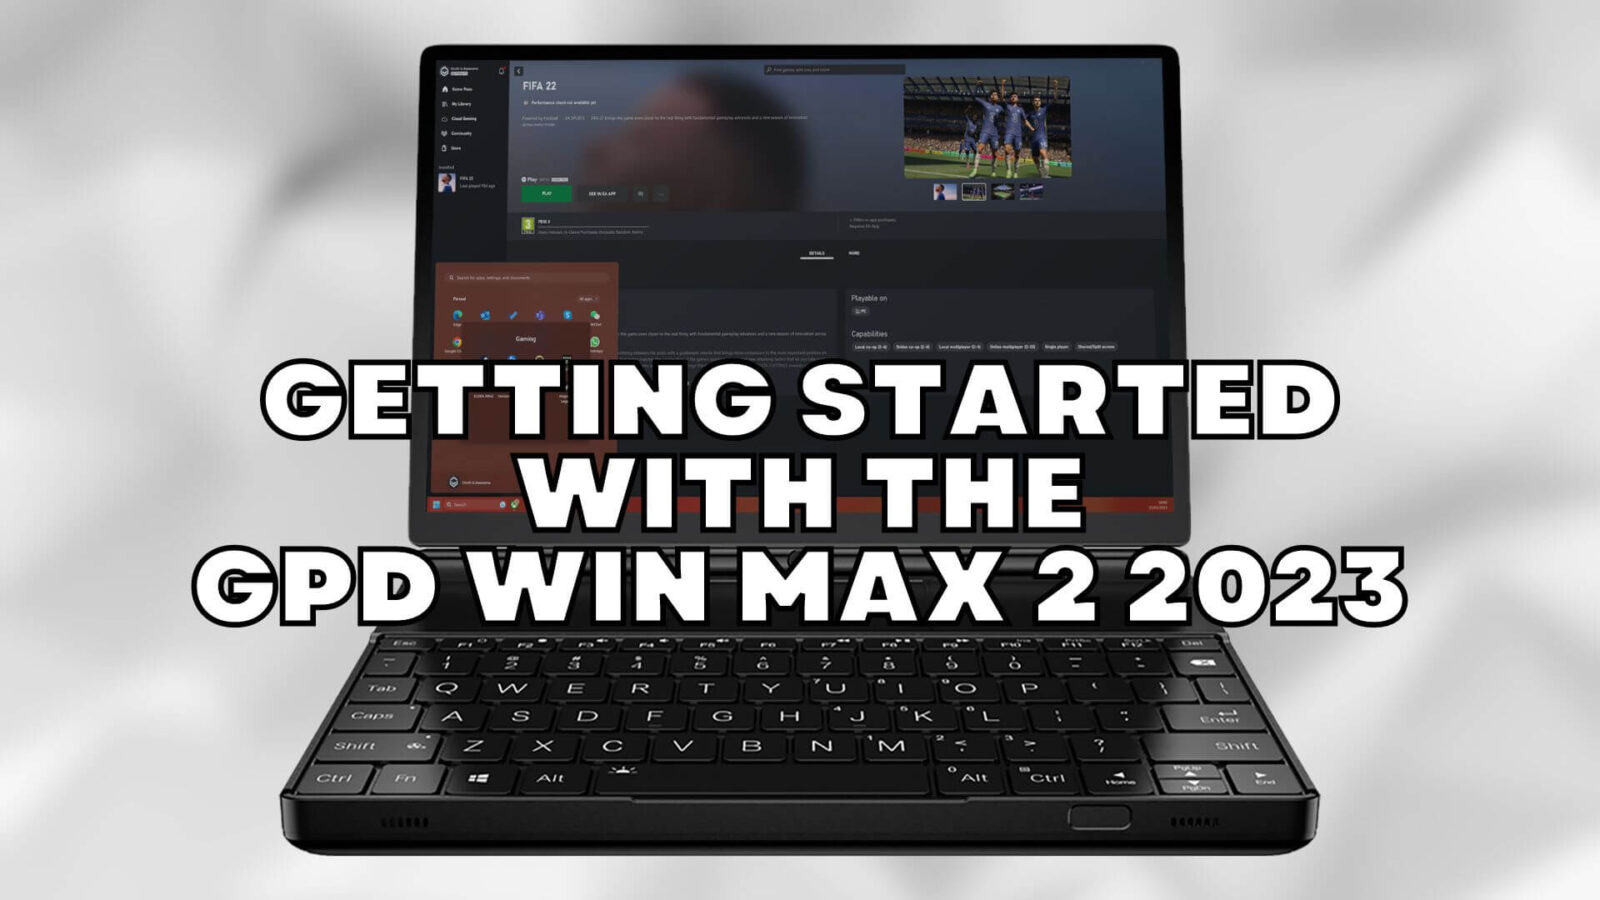 Getting started with the GPD WIN MAX 2 2023